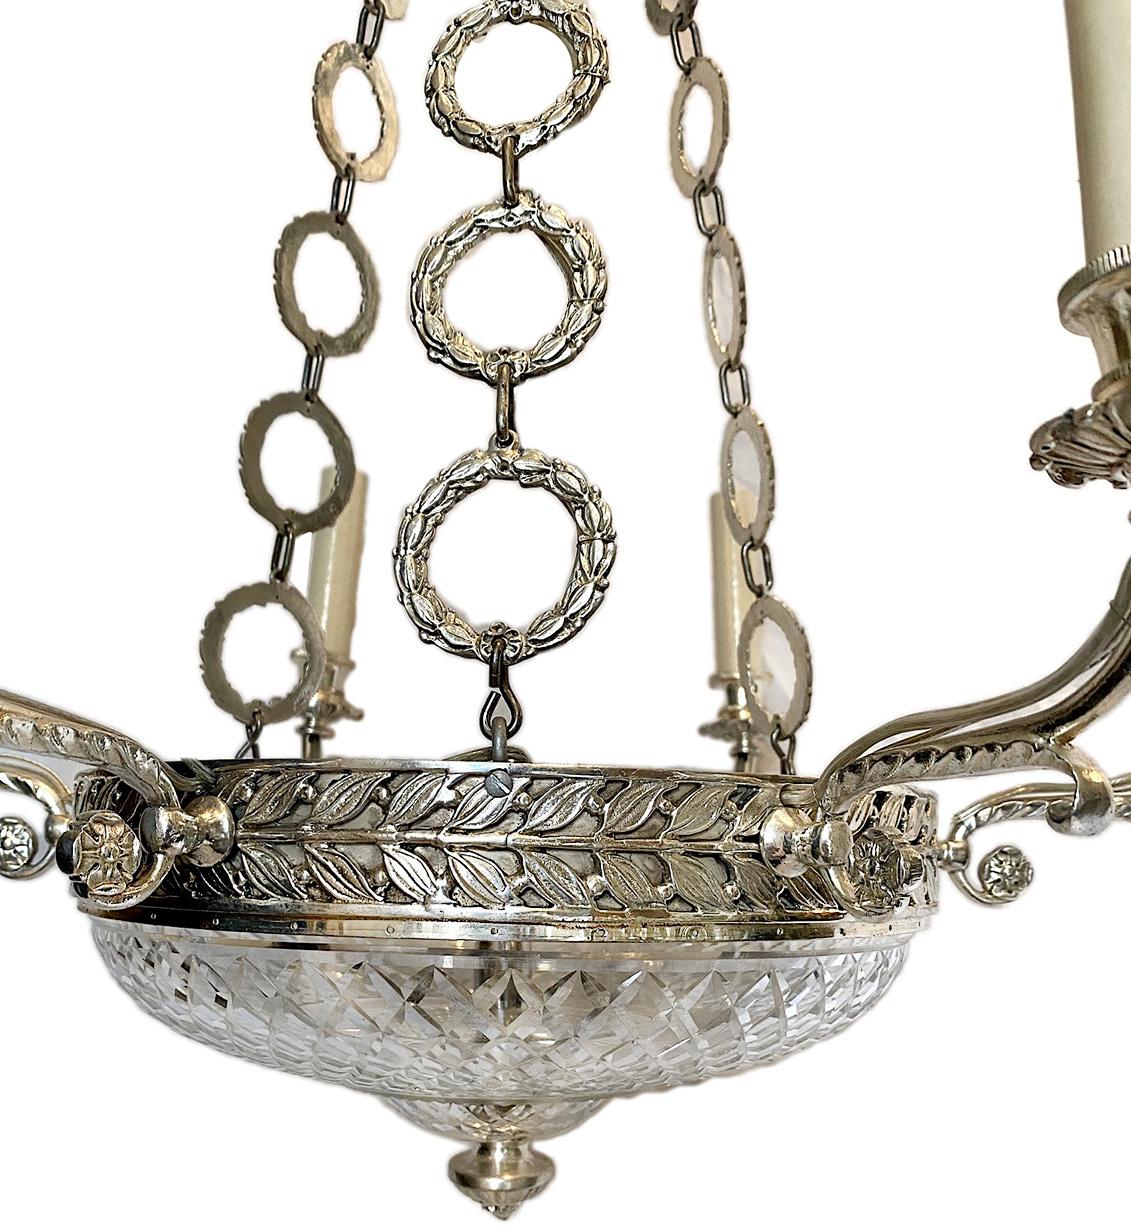 Early 20th Century Silver Plated French Empire Chandelier For Sale